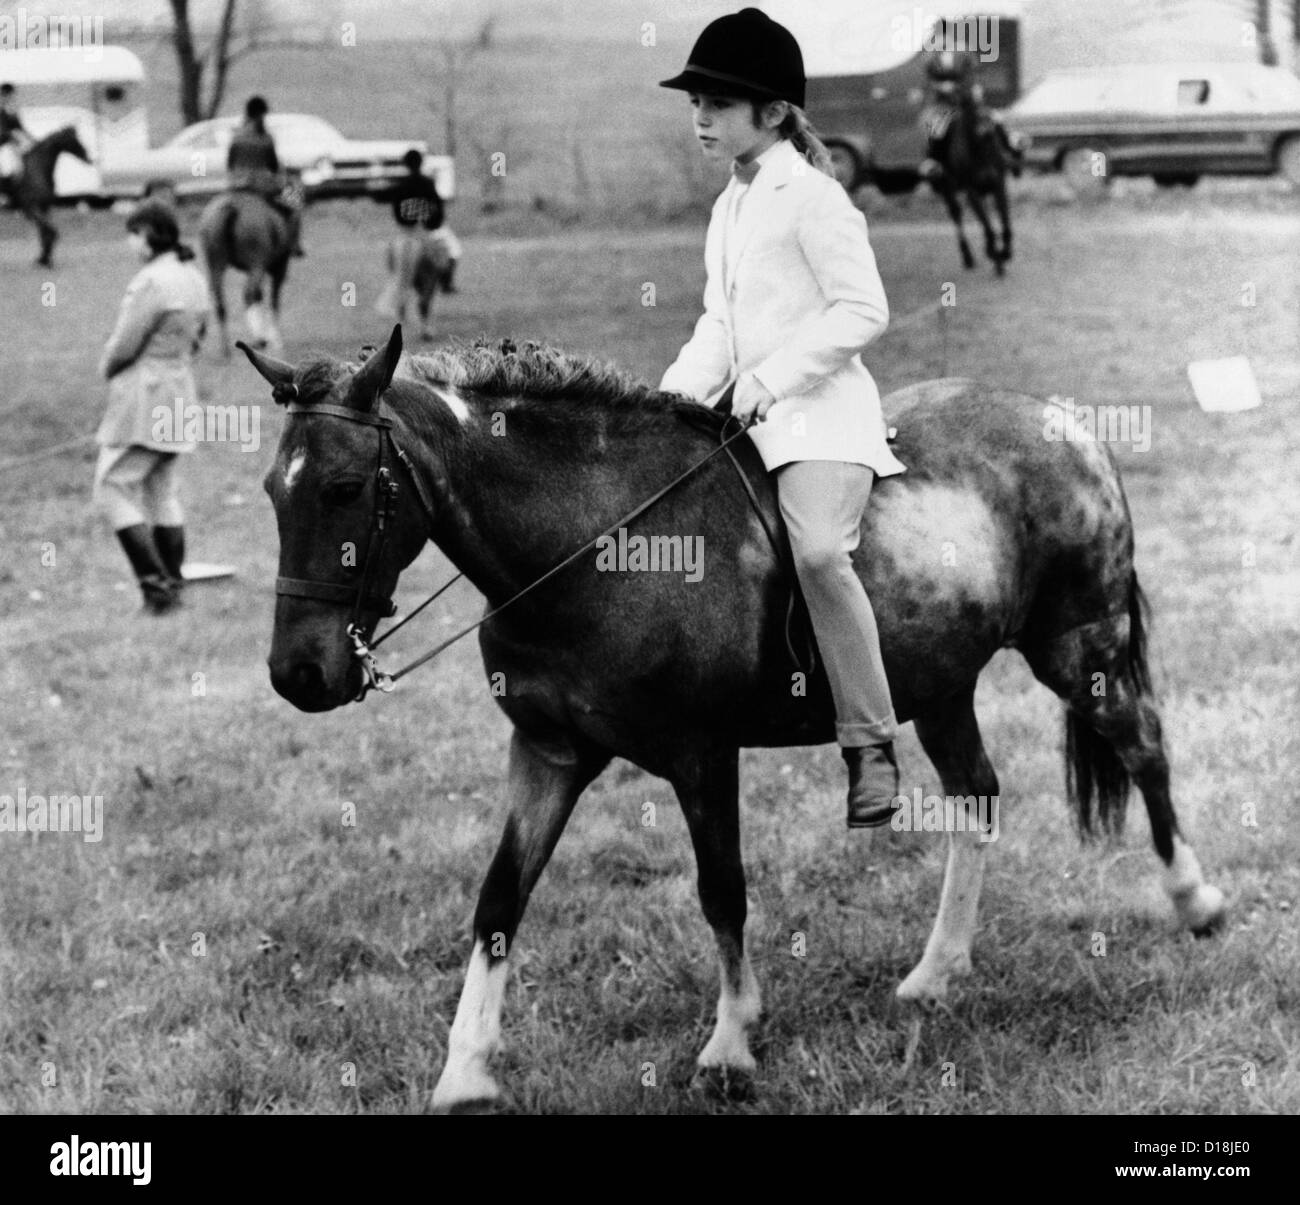 caroline-kennedy-nine-years-old-rides-her-pony-macaroni-at-the-annual-D18JE0.jpg